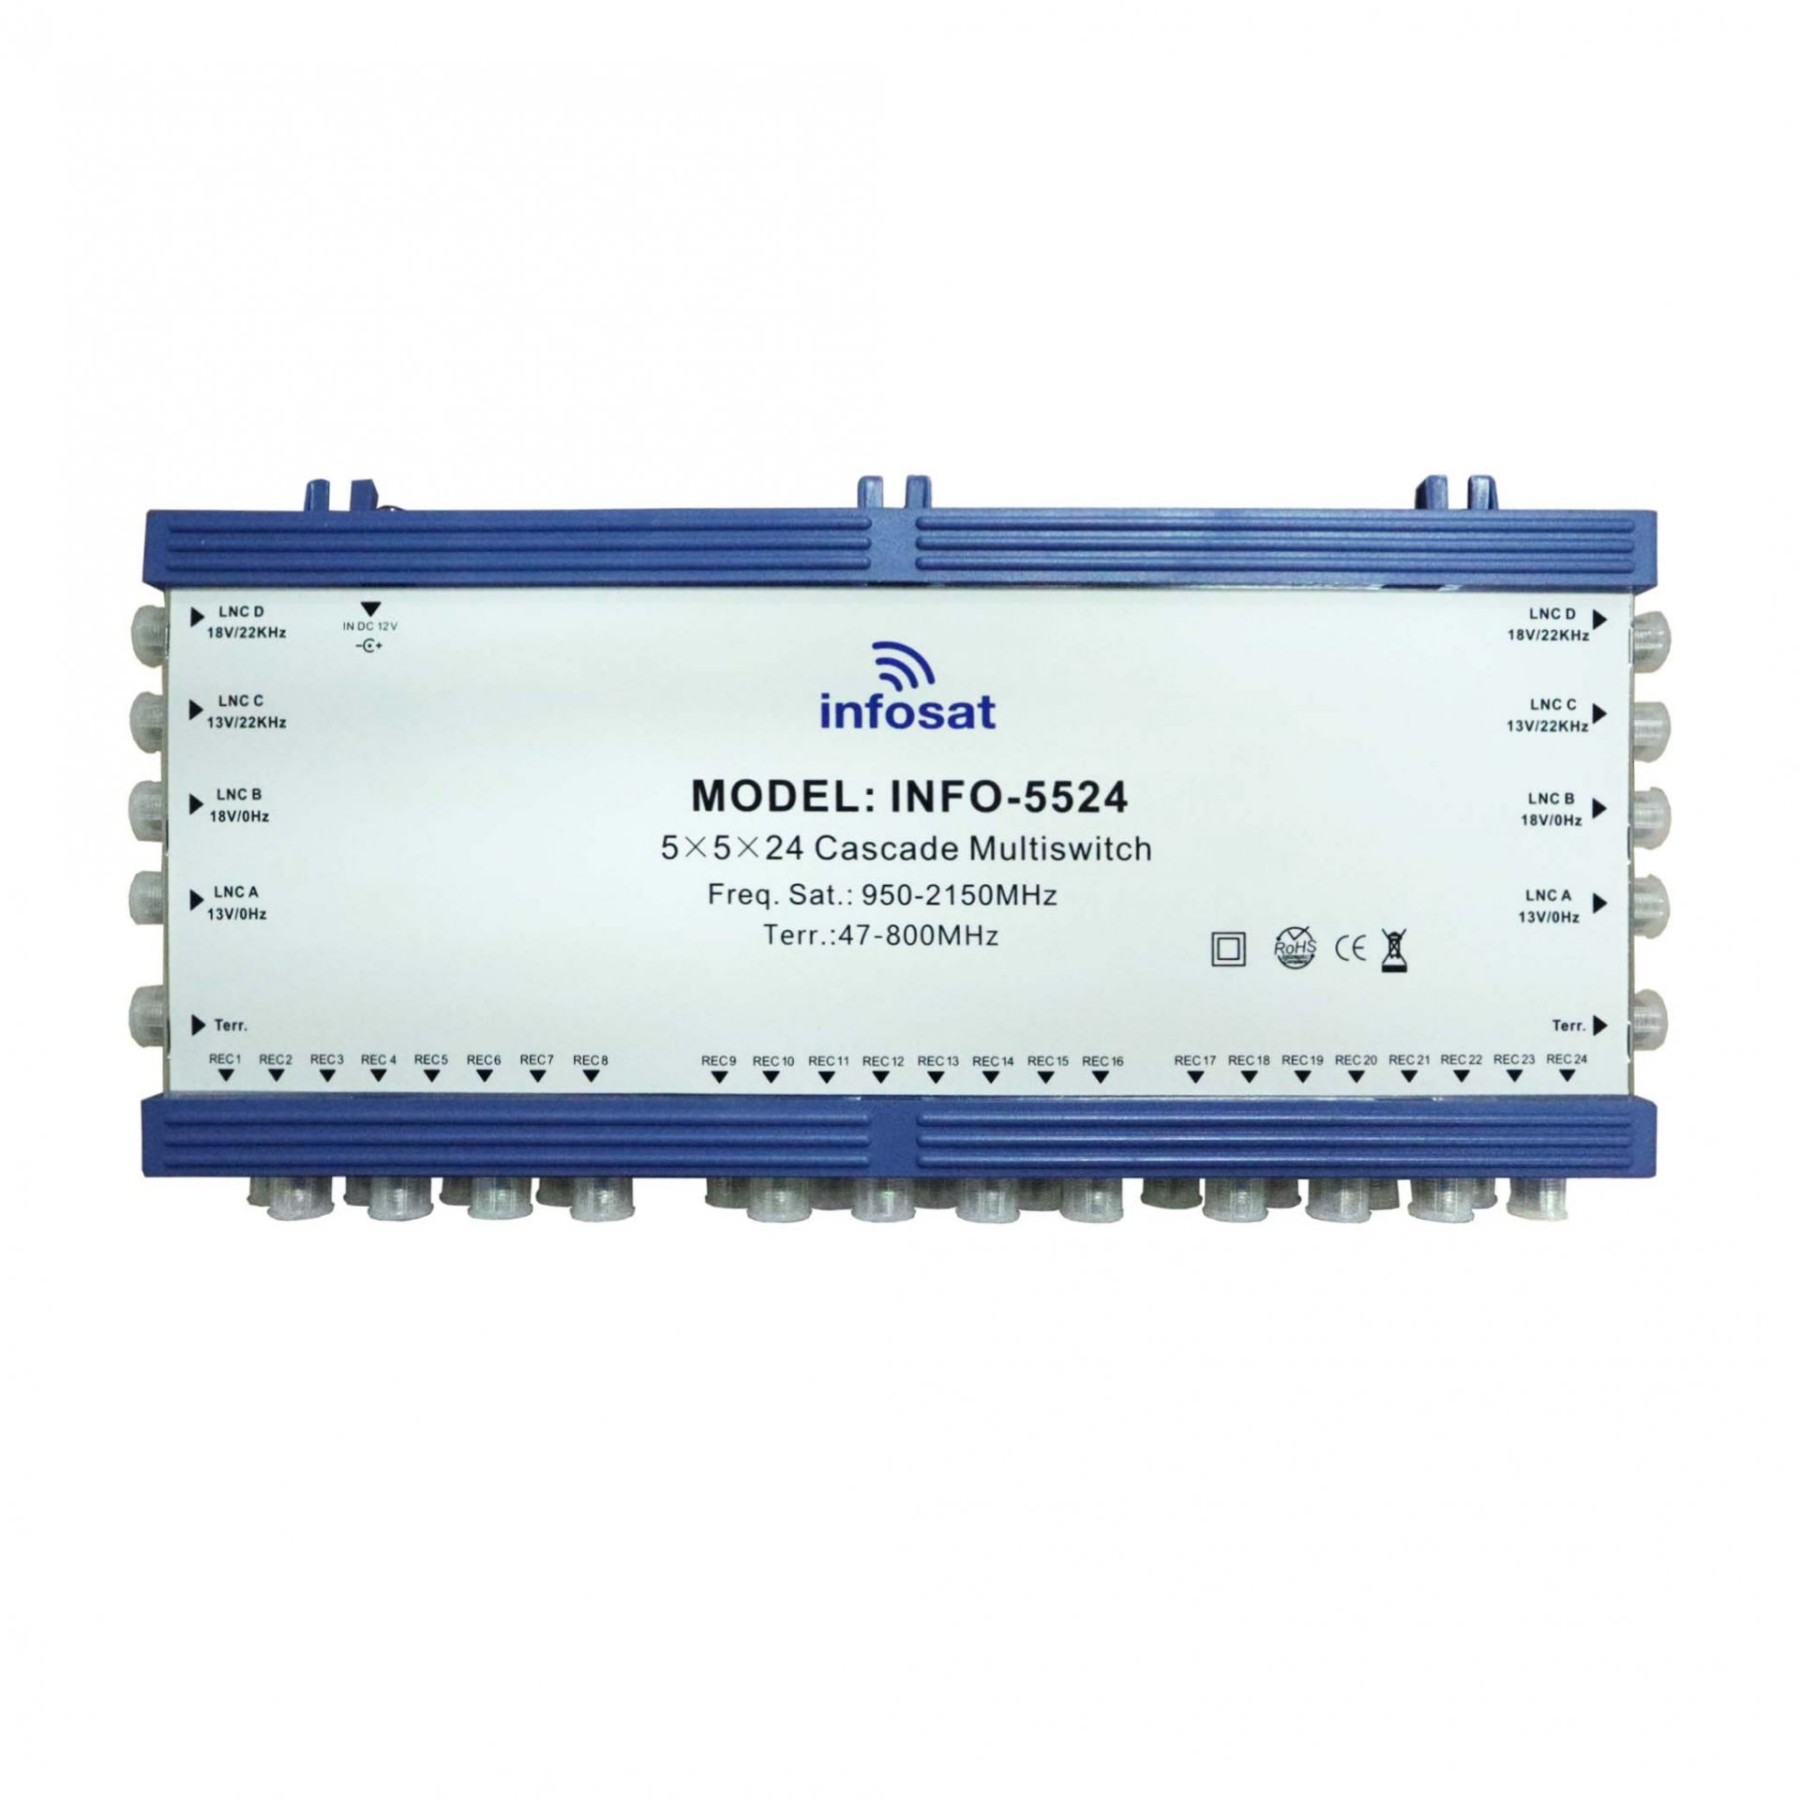 INF5524 Cascade Multiswitch